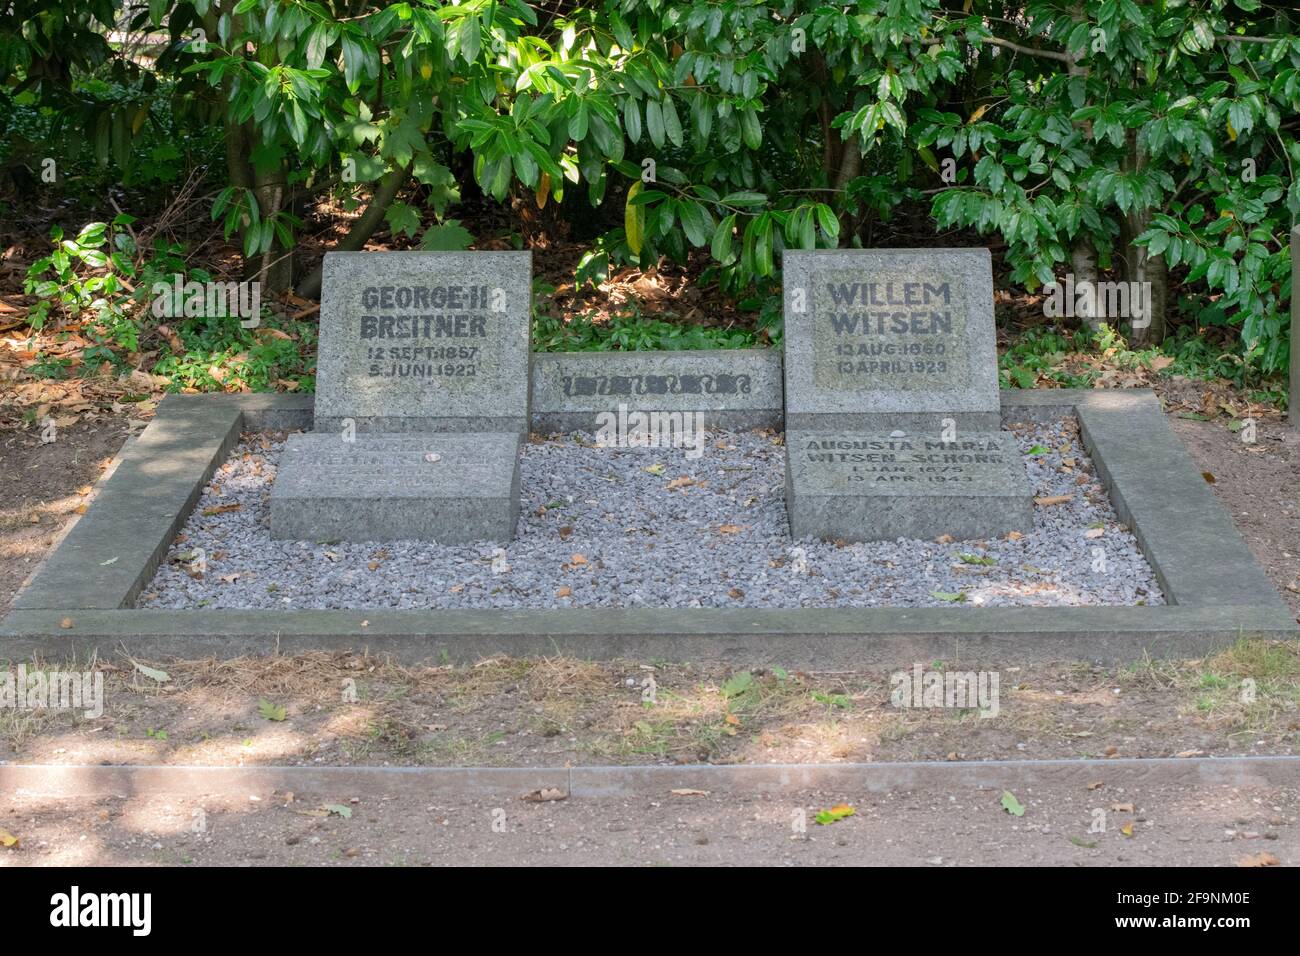 Grave George II Breitner And Willem Witsen At Amsterdam The Netherlands 16-8-2020 Stock Photo